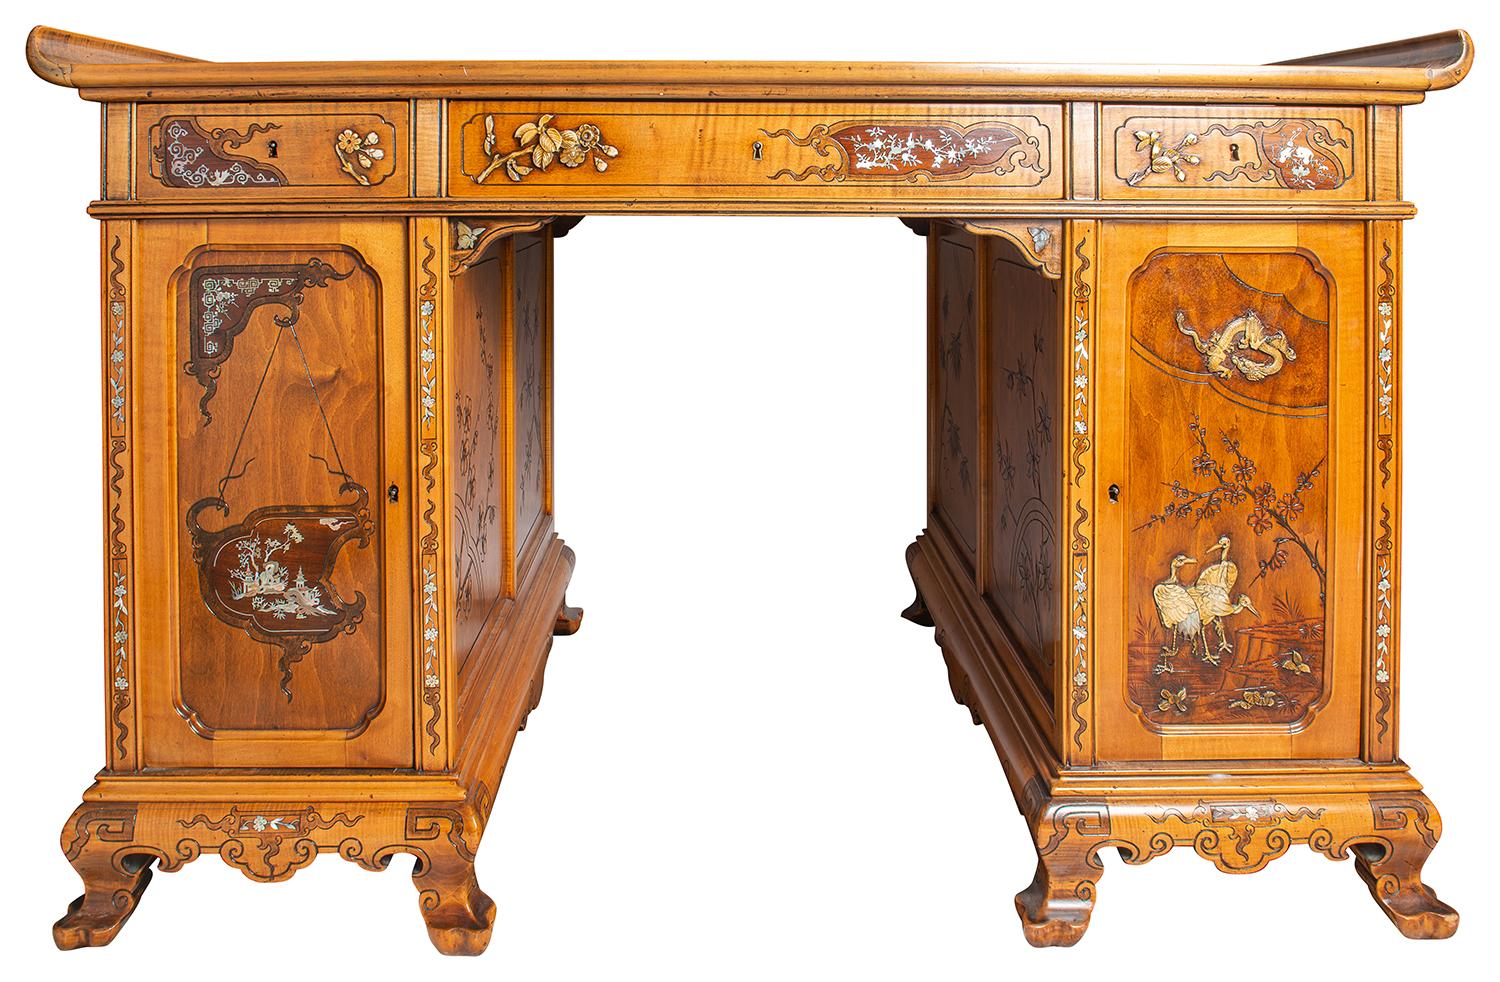 Inlay Japanned 19th Century Pedestal Desk, Attributed to Viardot For Sale